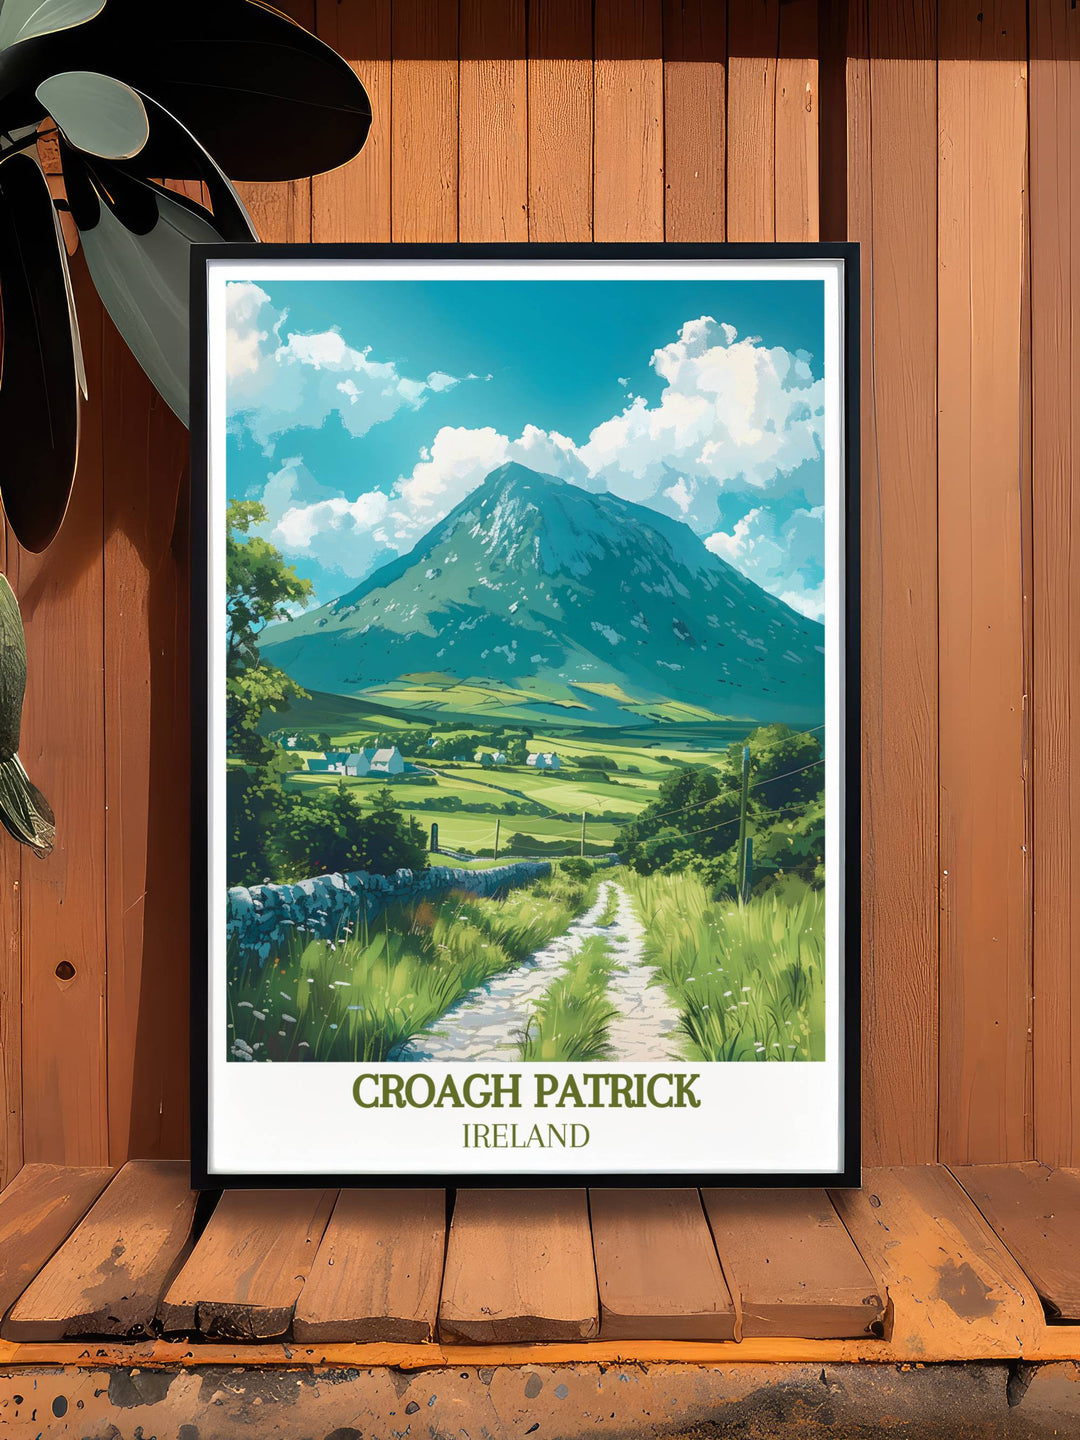 Experience the spiritual journey of the Croagh Patrick Trail with this travel poster depicting the majestic mountain and the historic Tochar Phadraig pilgrimage route. Ideal for those who appreciate Ireland Catholic themes and Irish wall art.